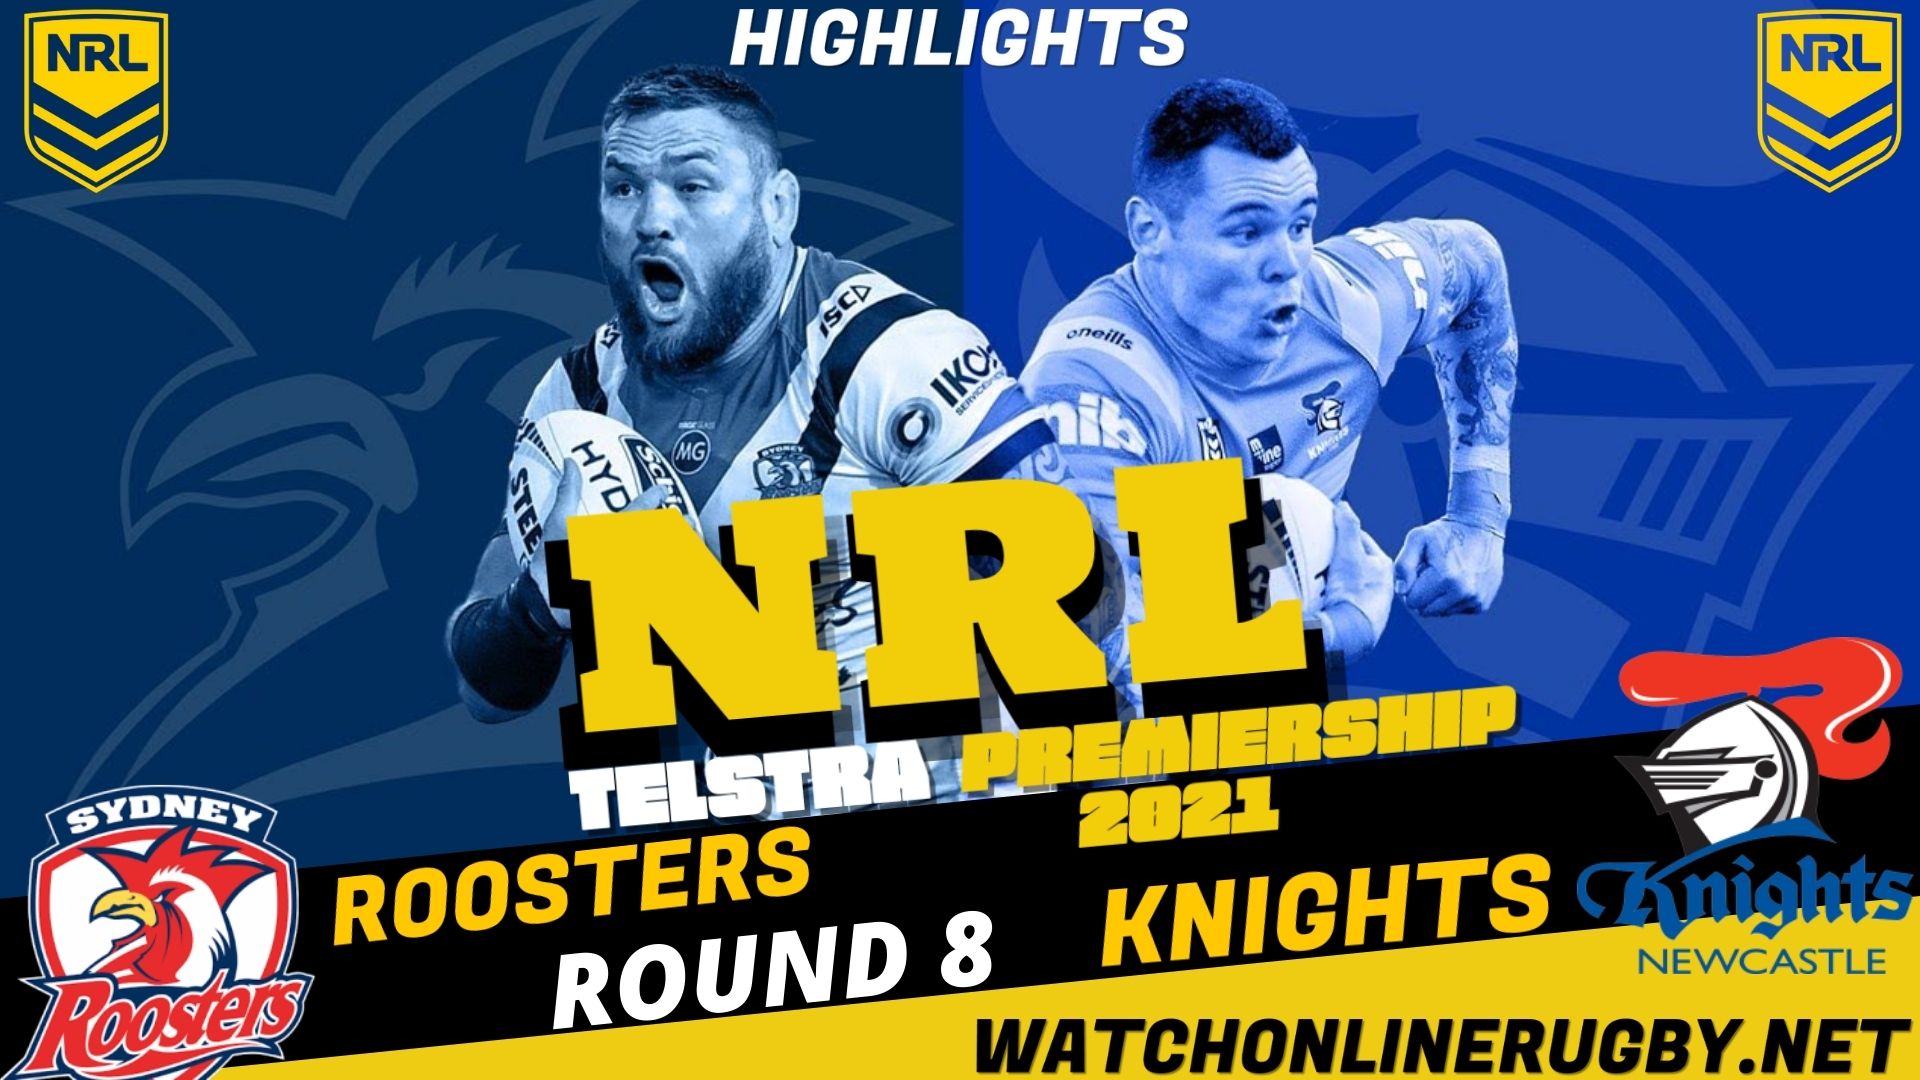 Knights Vs Roosters Highlights RD 8 NRL Rugby